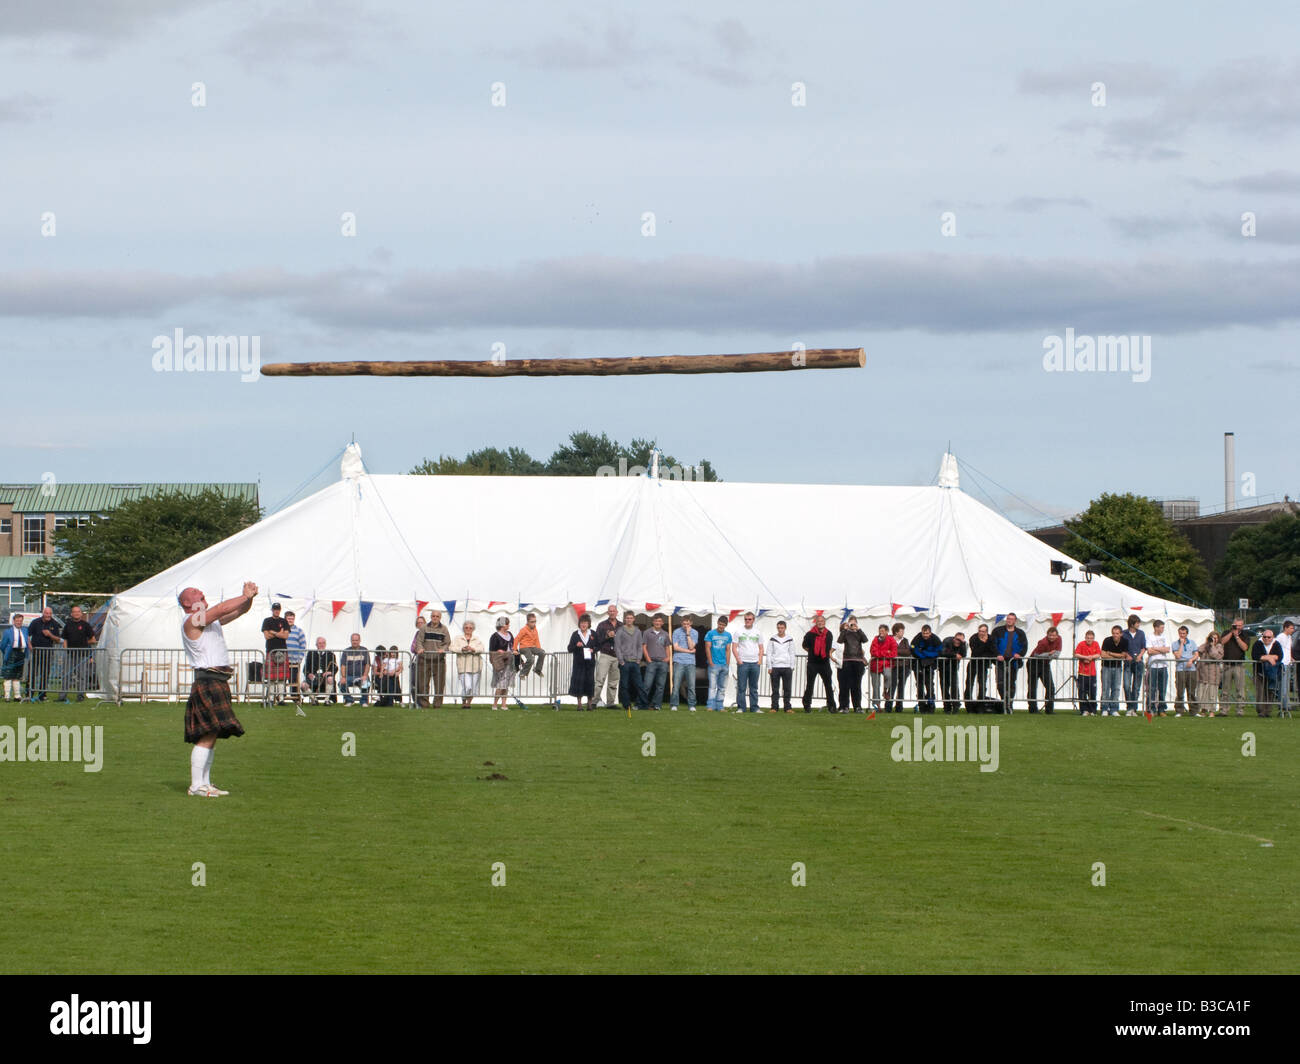 A contestant tosses the caber (the trunk of a pine tree) at a Scottish Highland Games gathering in Invergordon, Scotland Stock Photo